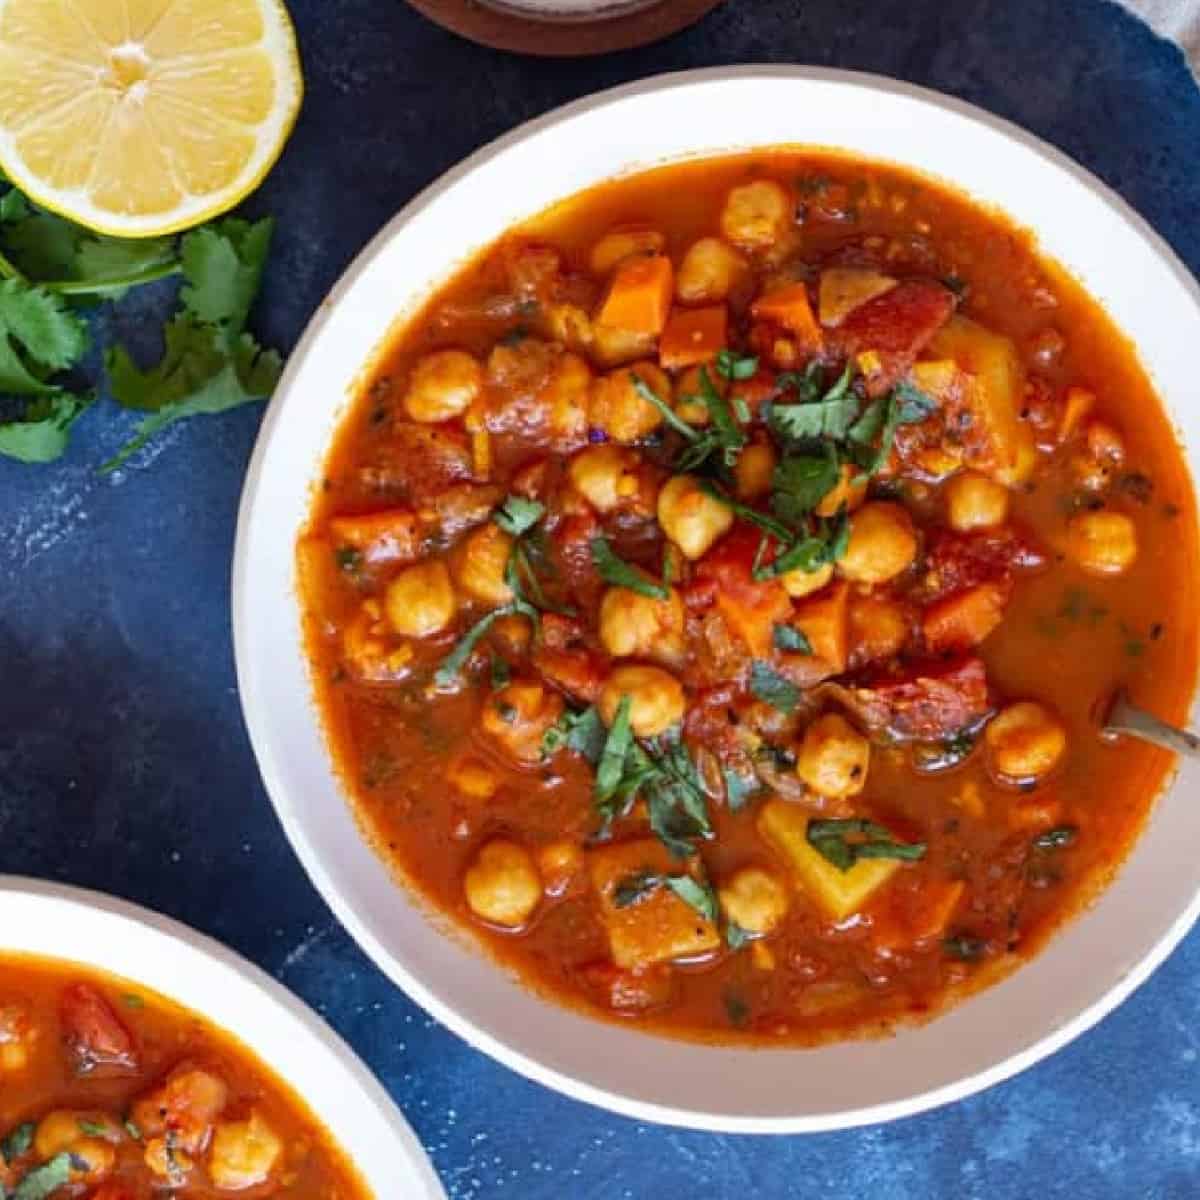 Moroccan chickpea stew is made with simple ingredients and flavored with warm spices. It’s easy and ready in no time!
